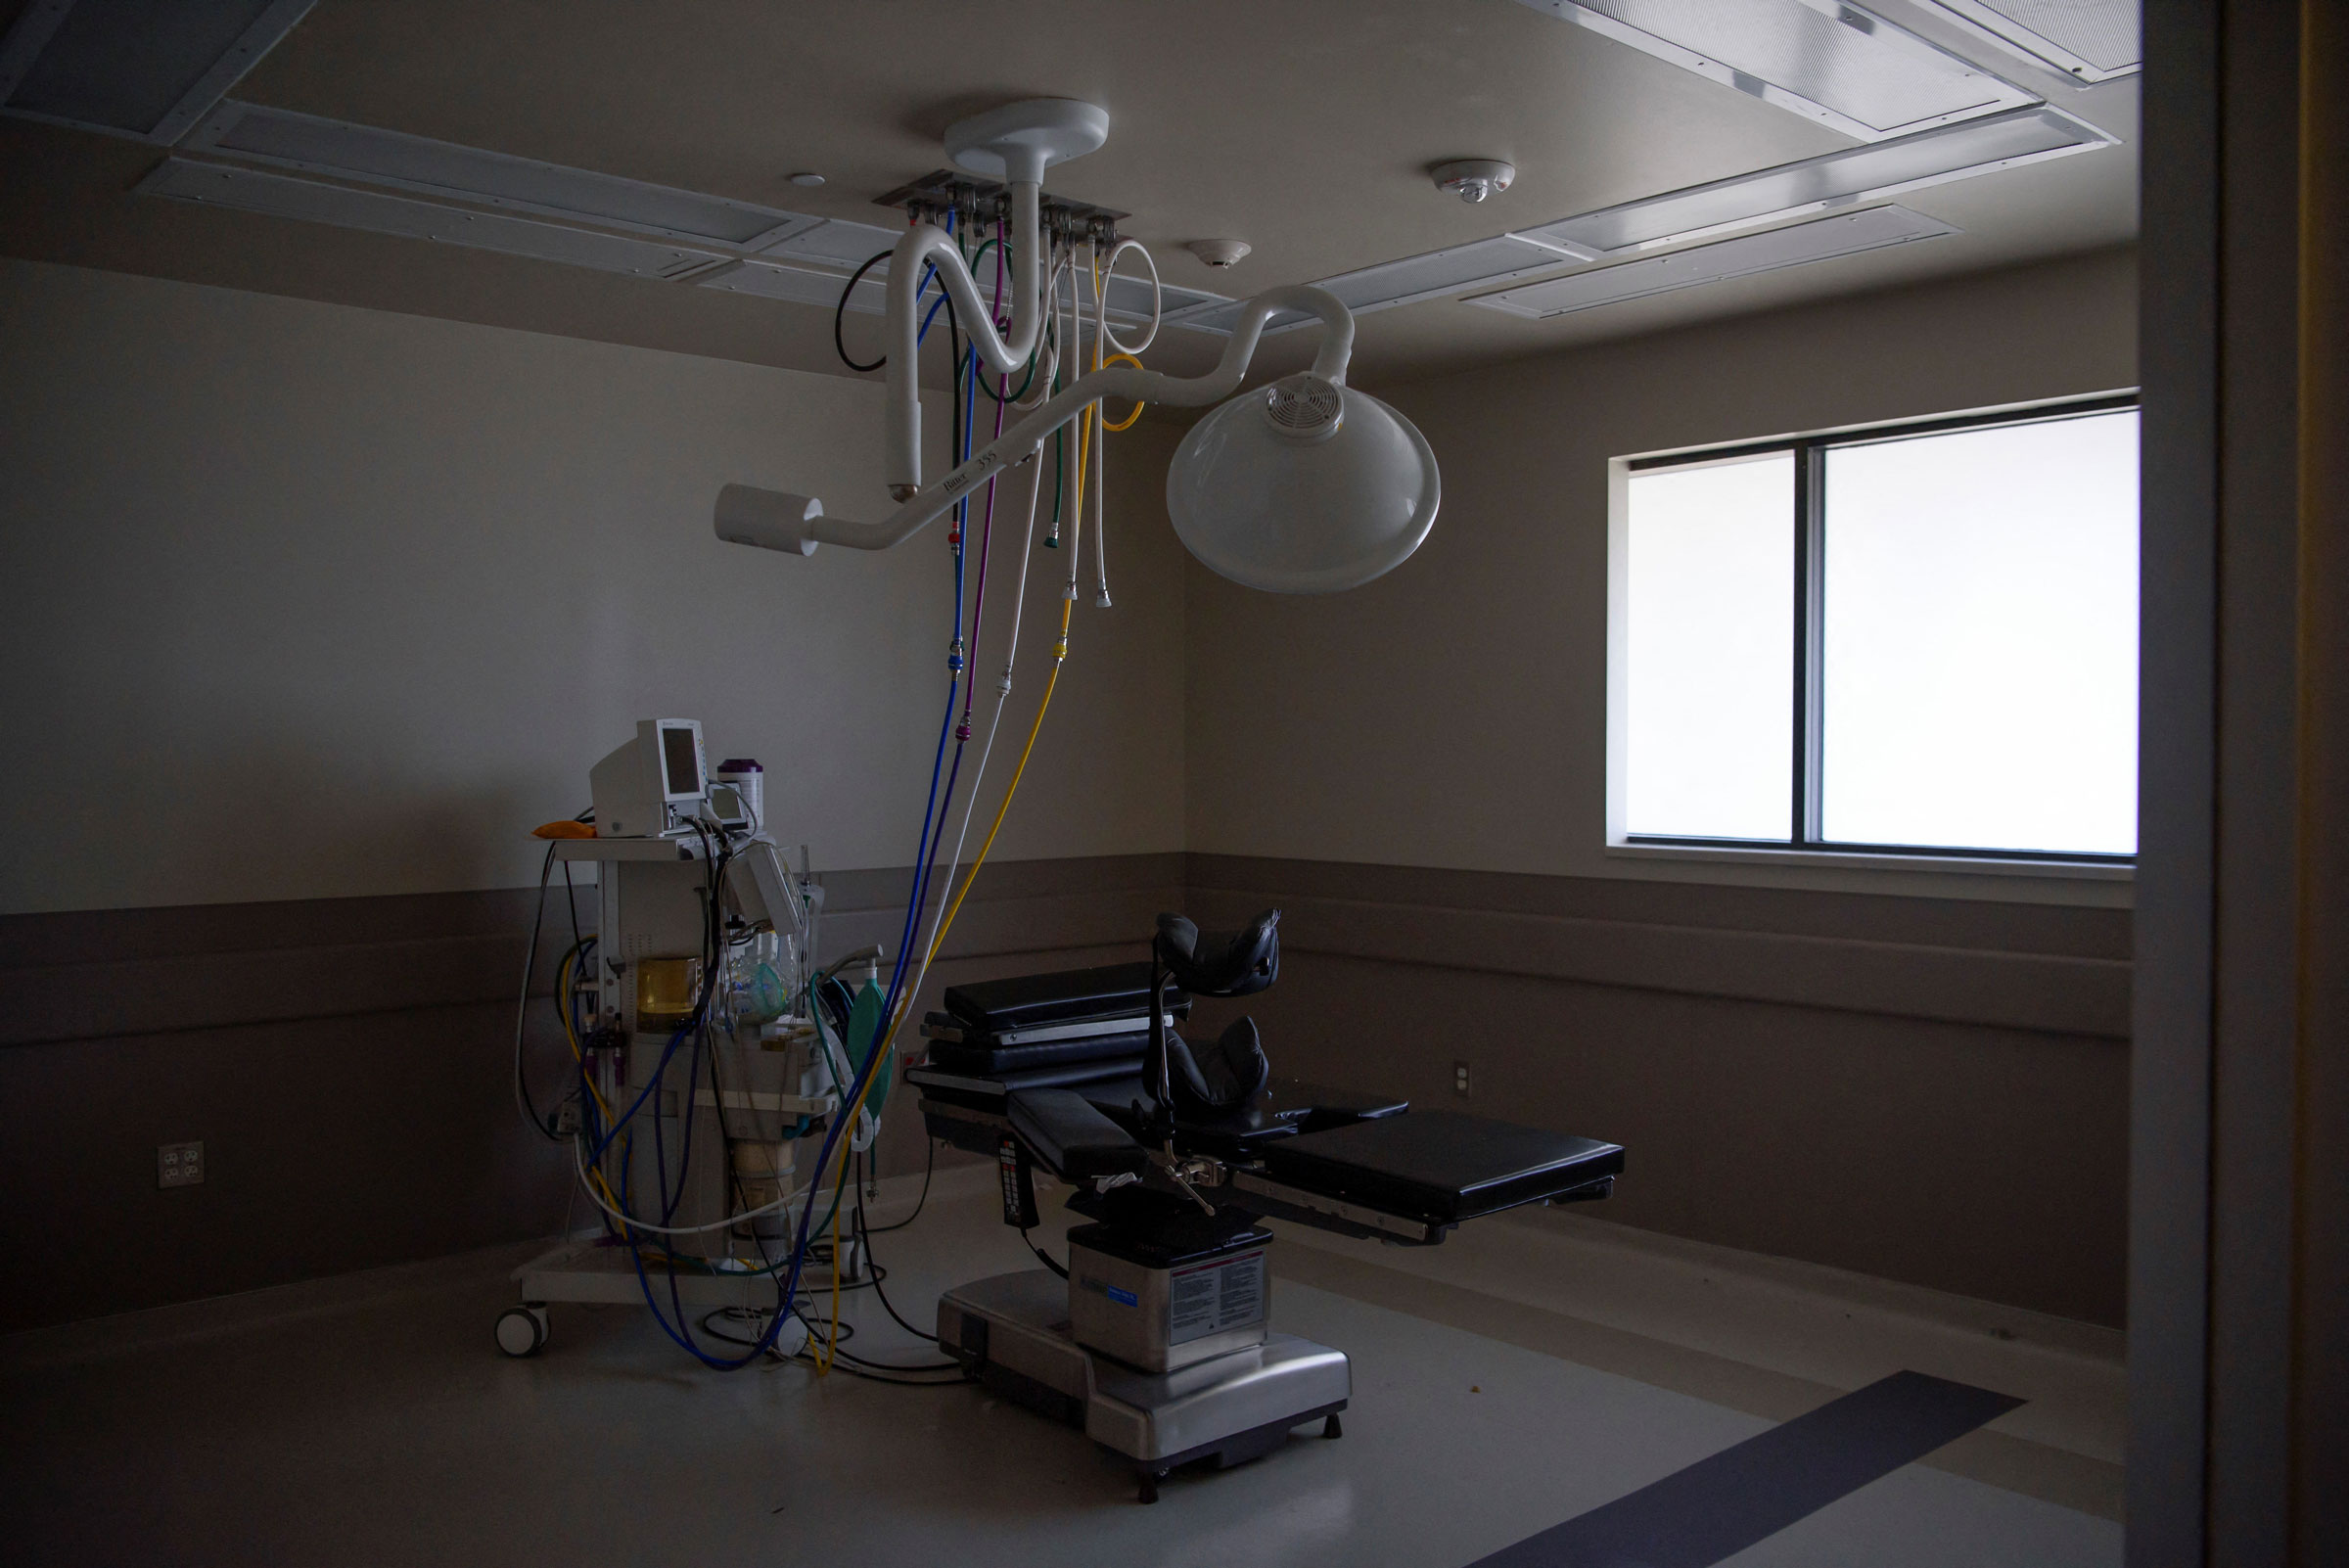 An operating room sits empty at Alamo Women's Reproductive Services, an abortion clinic that closed its doors following the overturn of Roe v. Wade and plans to reopen in New Mexico and Illinois, in San Antonio, Texas, on Aug. 16, 2022.